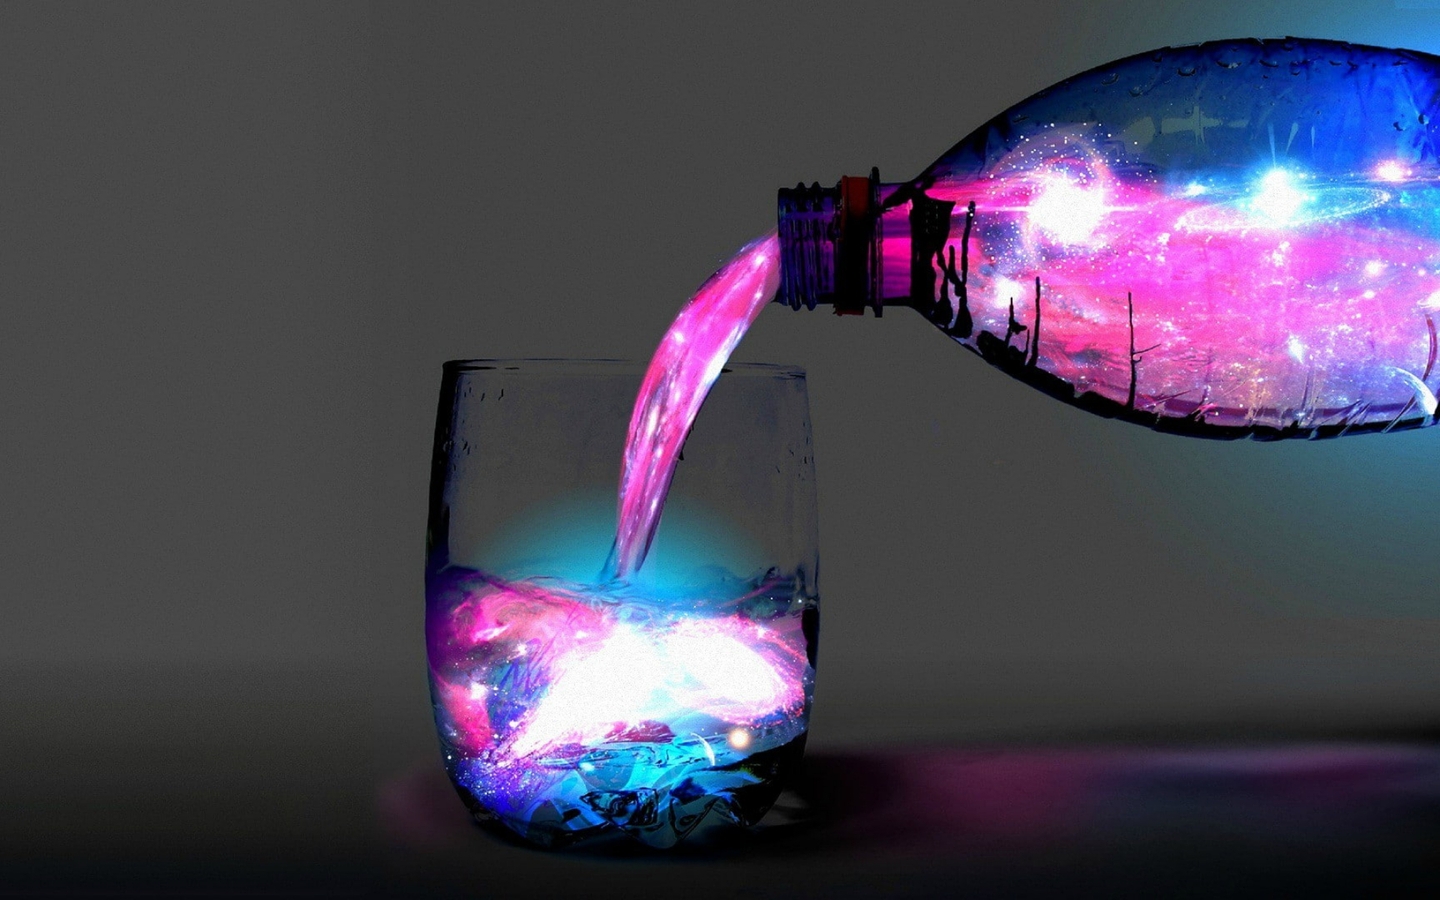 Image: Bottle, glass, water, space